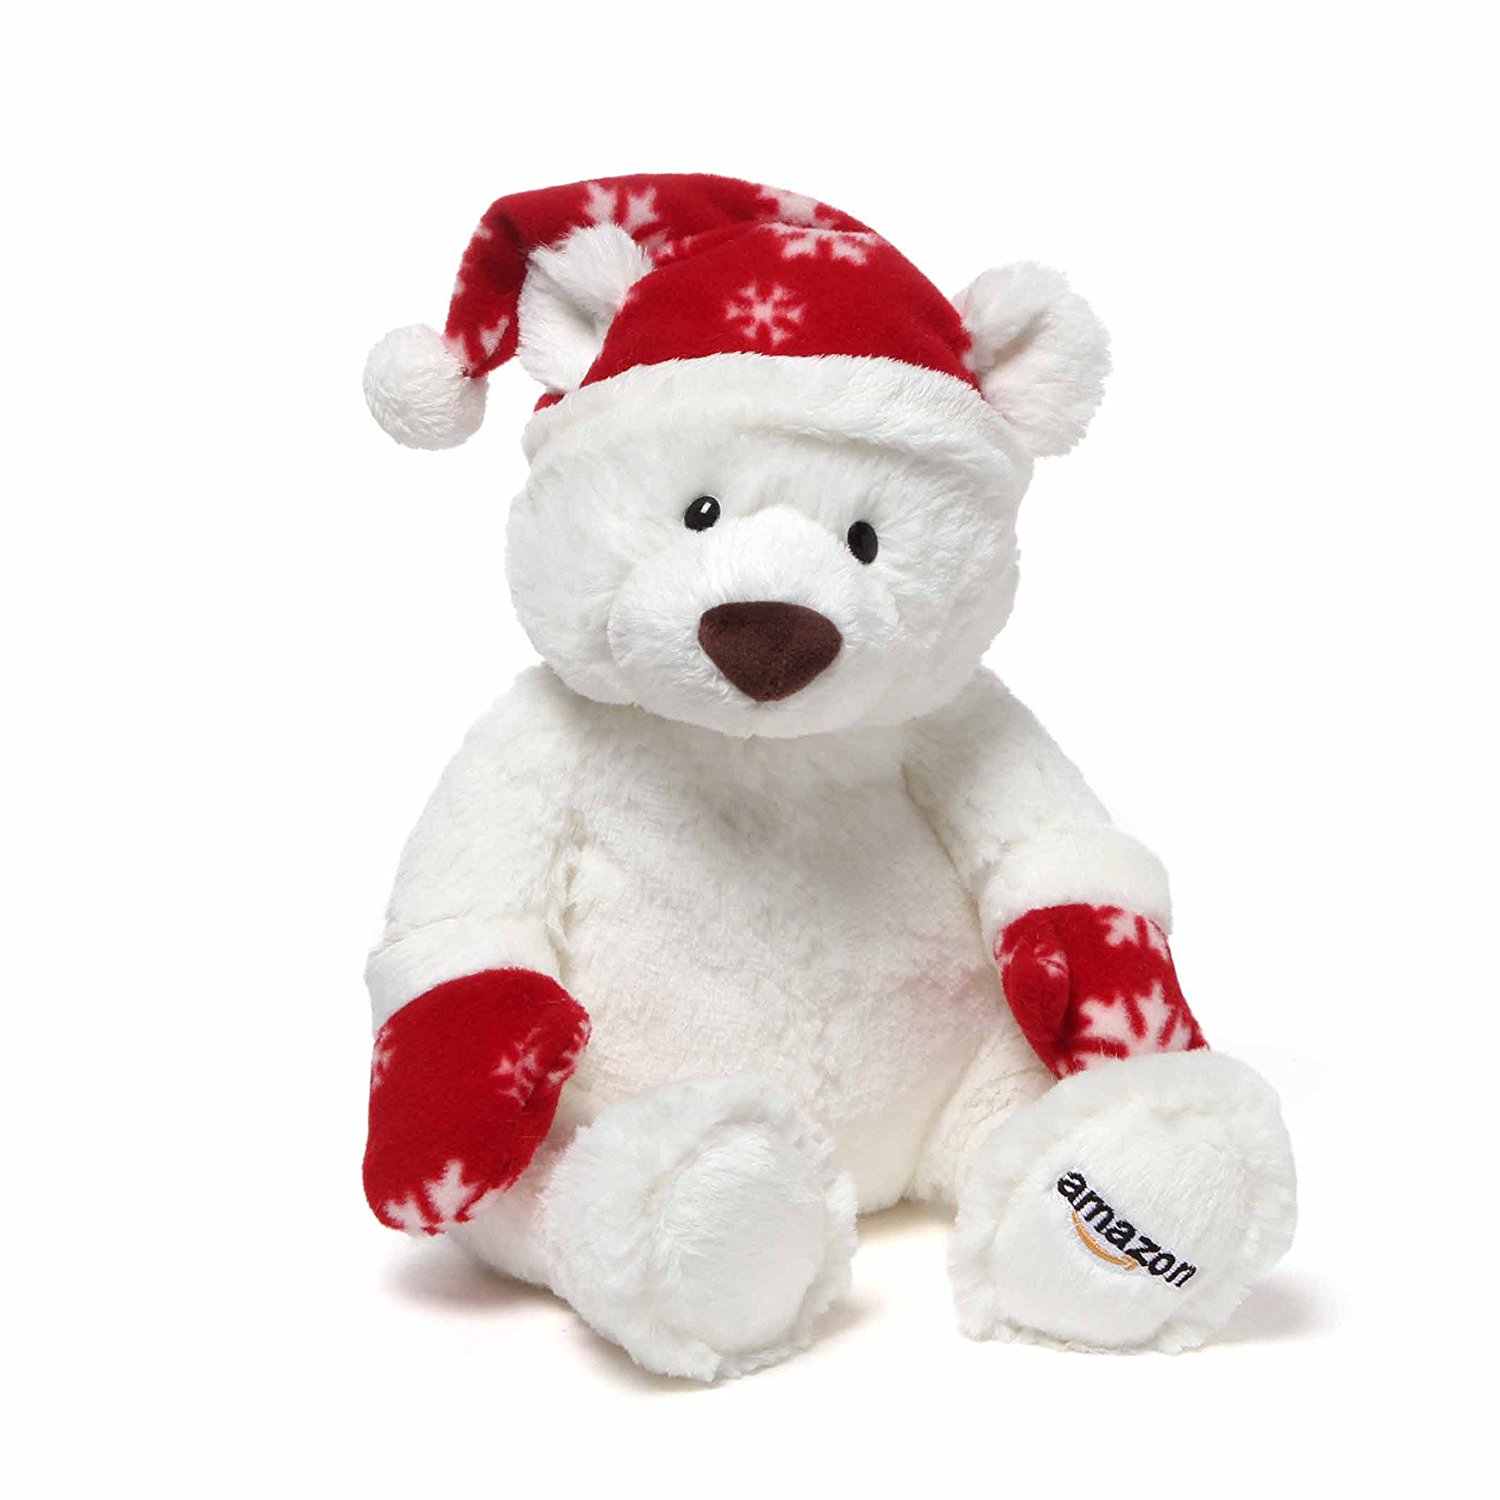 Spend $100 on Toys on Amazon & Get The Amazon 2016 Holiday Bear for FREE!